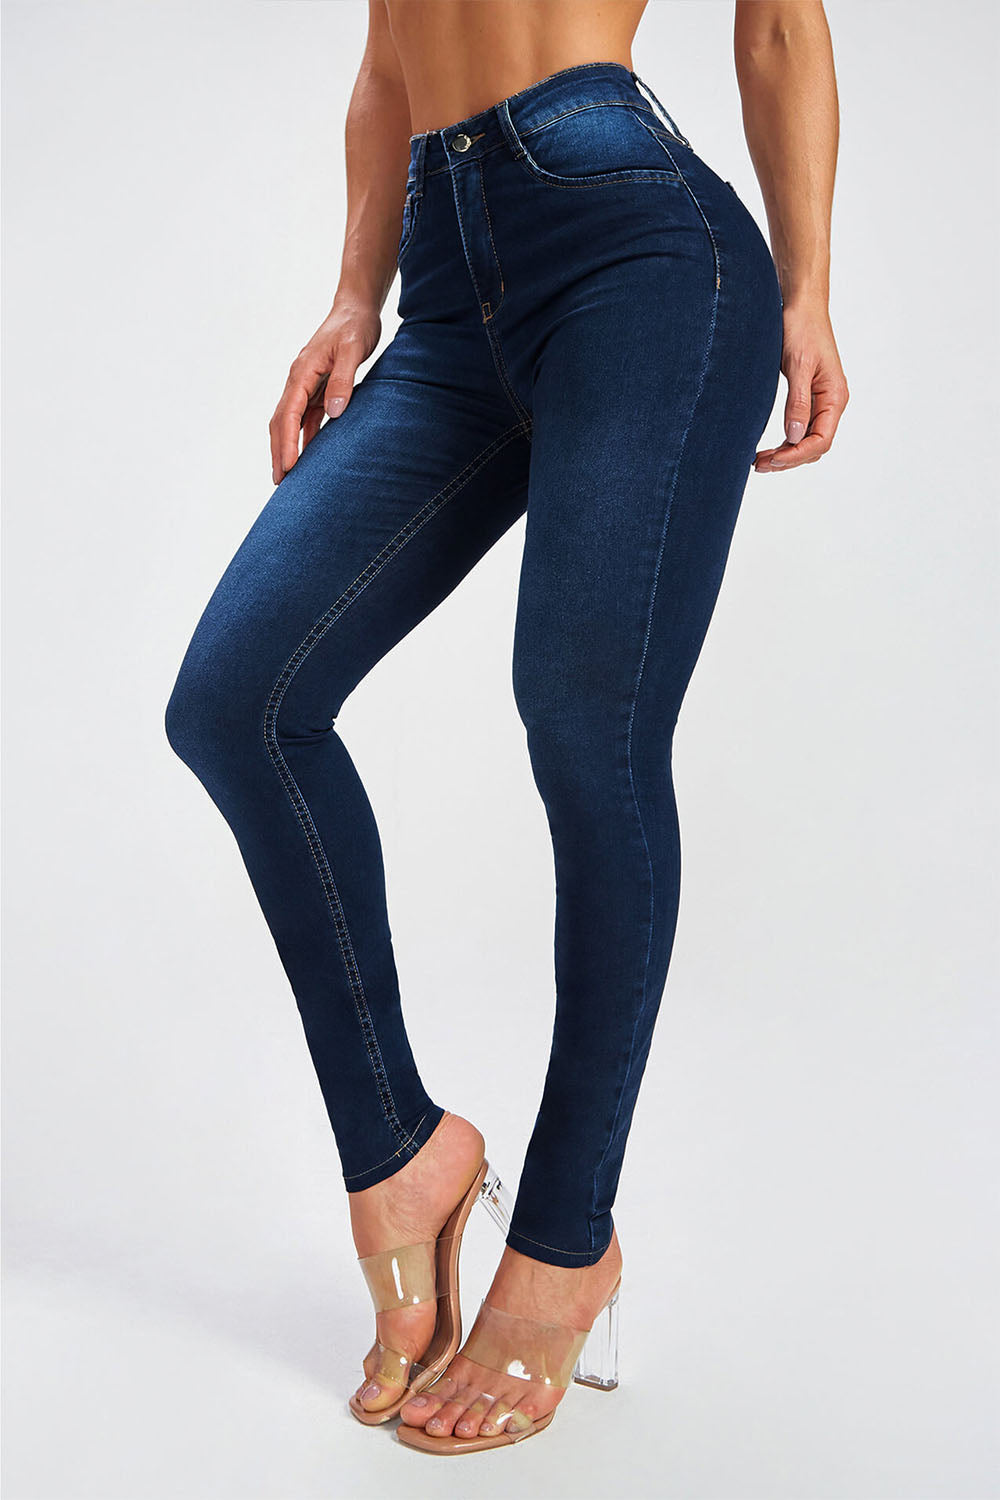 Buttoned Skinny Jeans - Bottoms - Pants - 6 - 2024